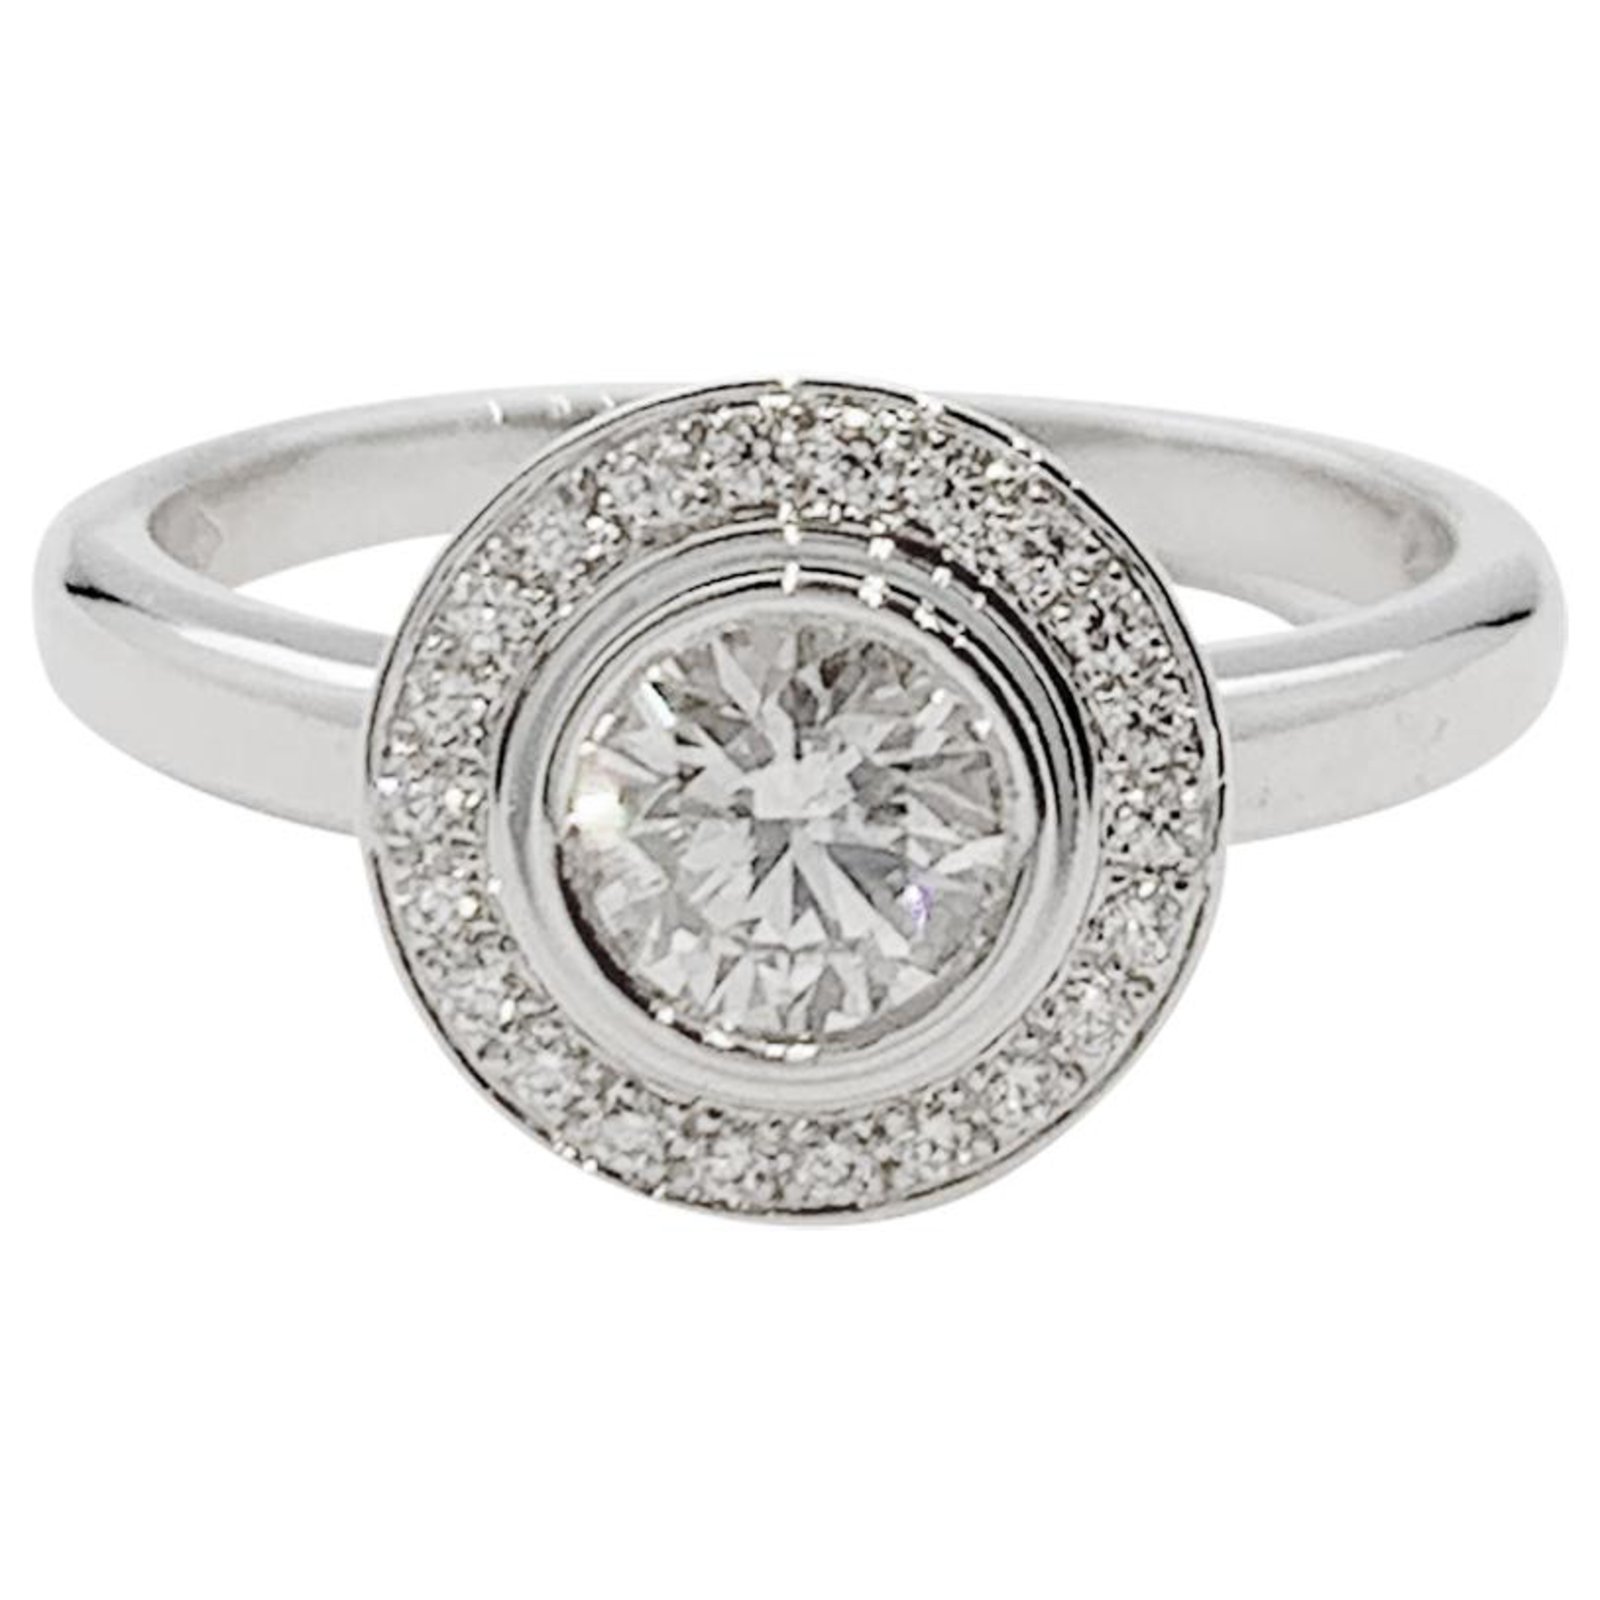 cartier d amour engagement ring